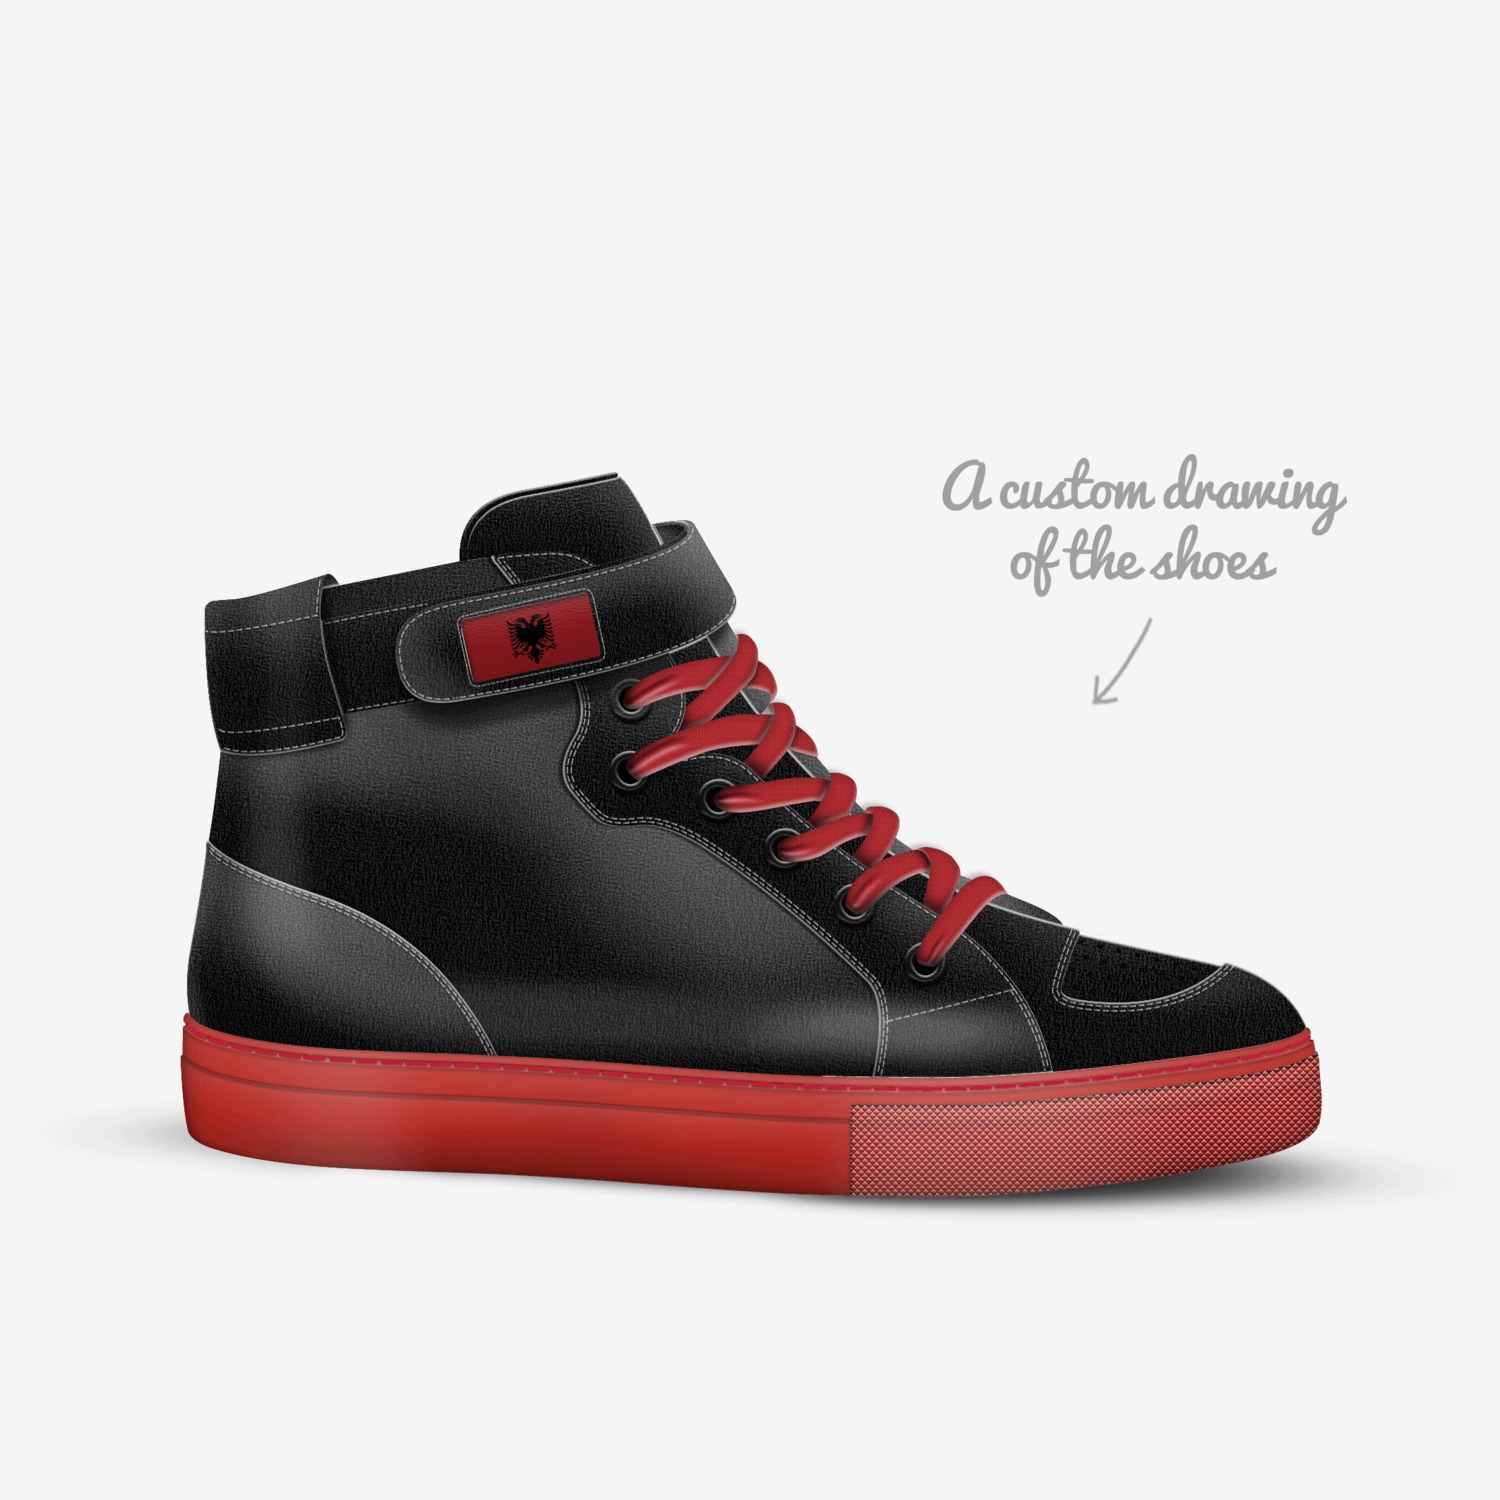 1912 | A Custom Shoe concept by Mikaela Musta